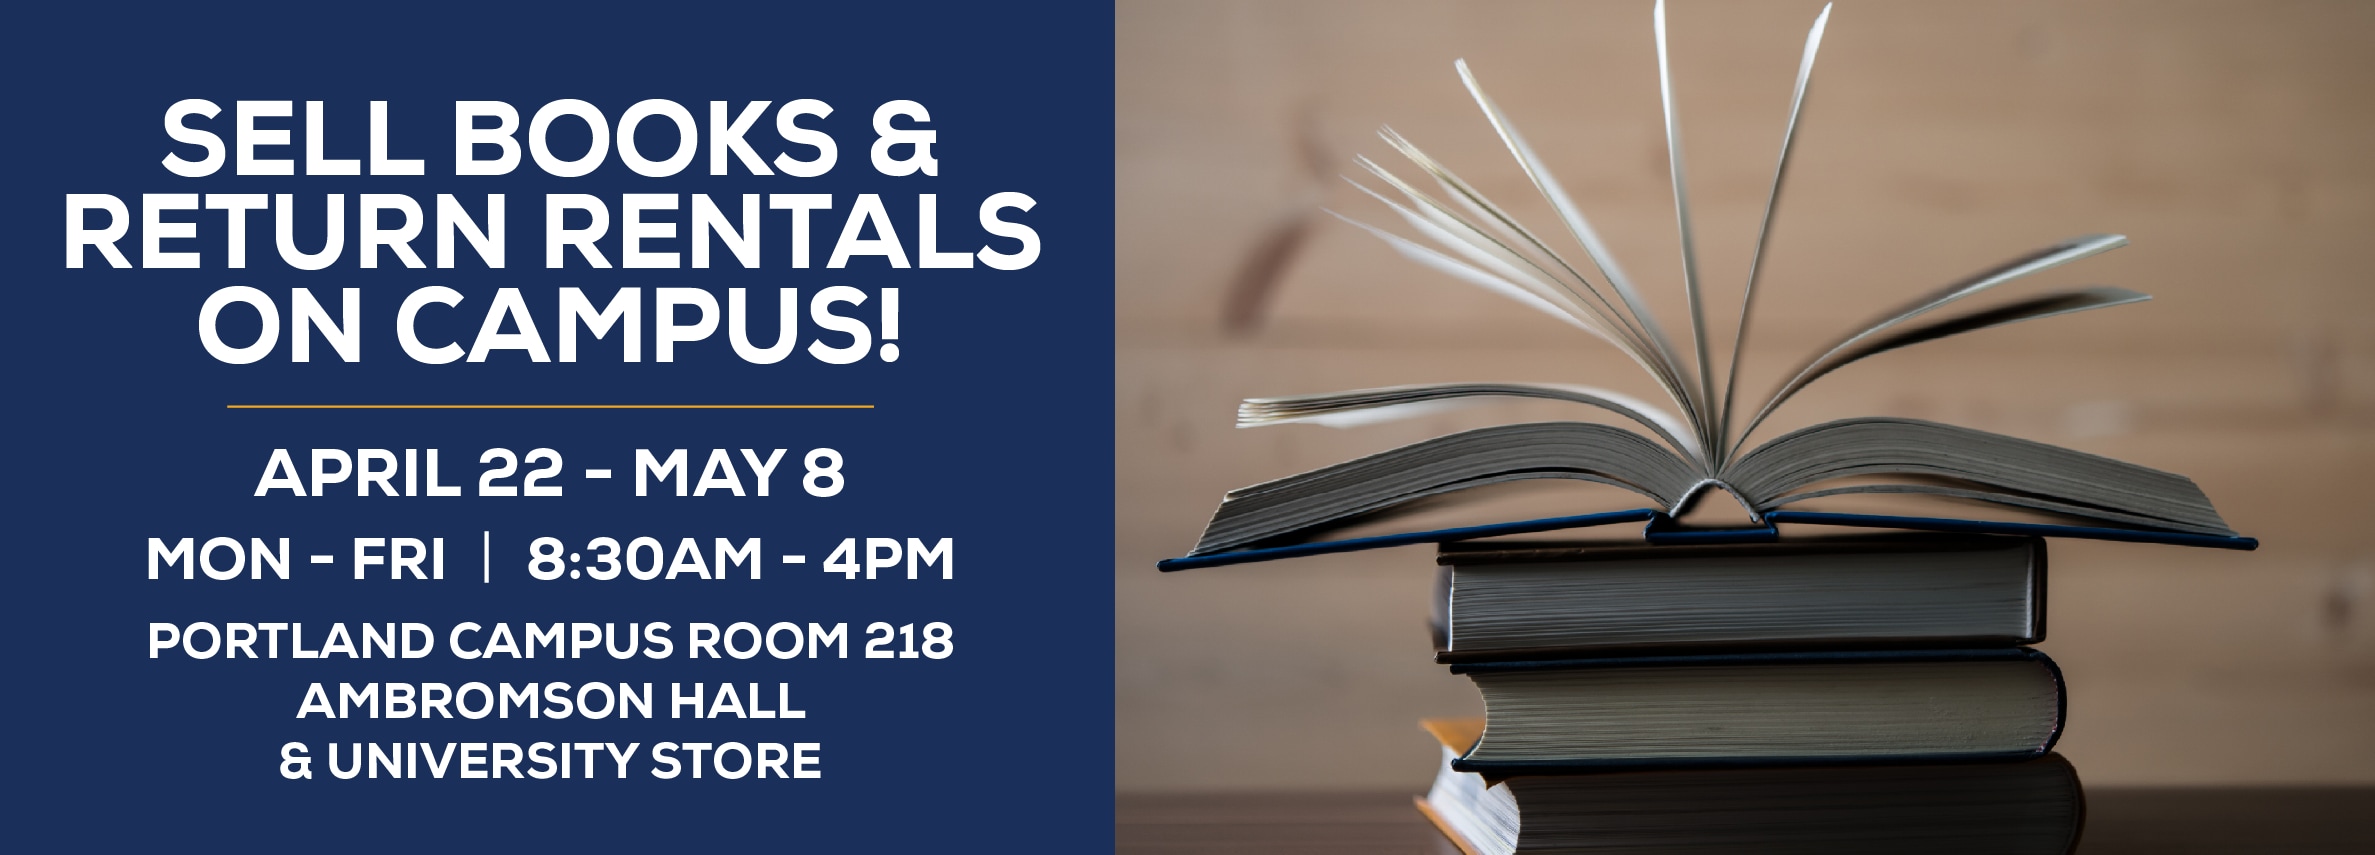 Sell your books and return your rentals on campus! April 22 - May 8. Monday through Friday | 8:30am to 4pm. Portland Campus Rm 218 Ambromson Hall & University Store